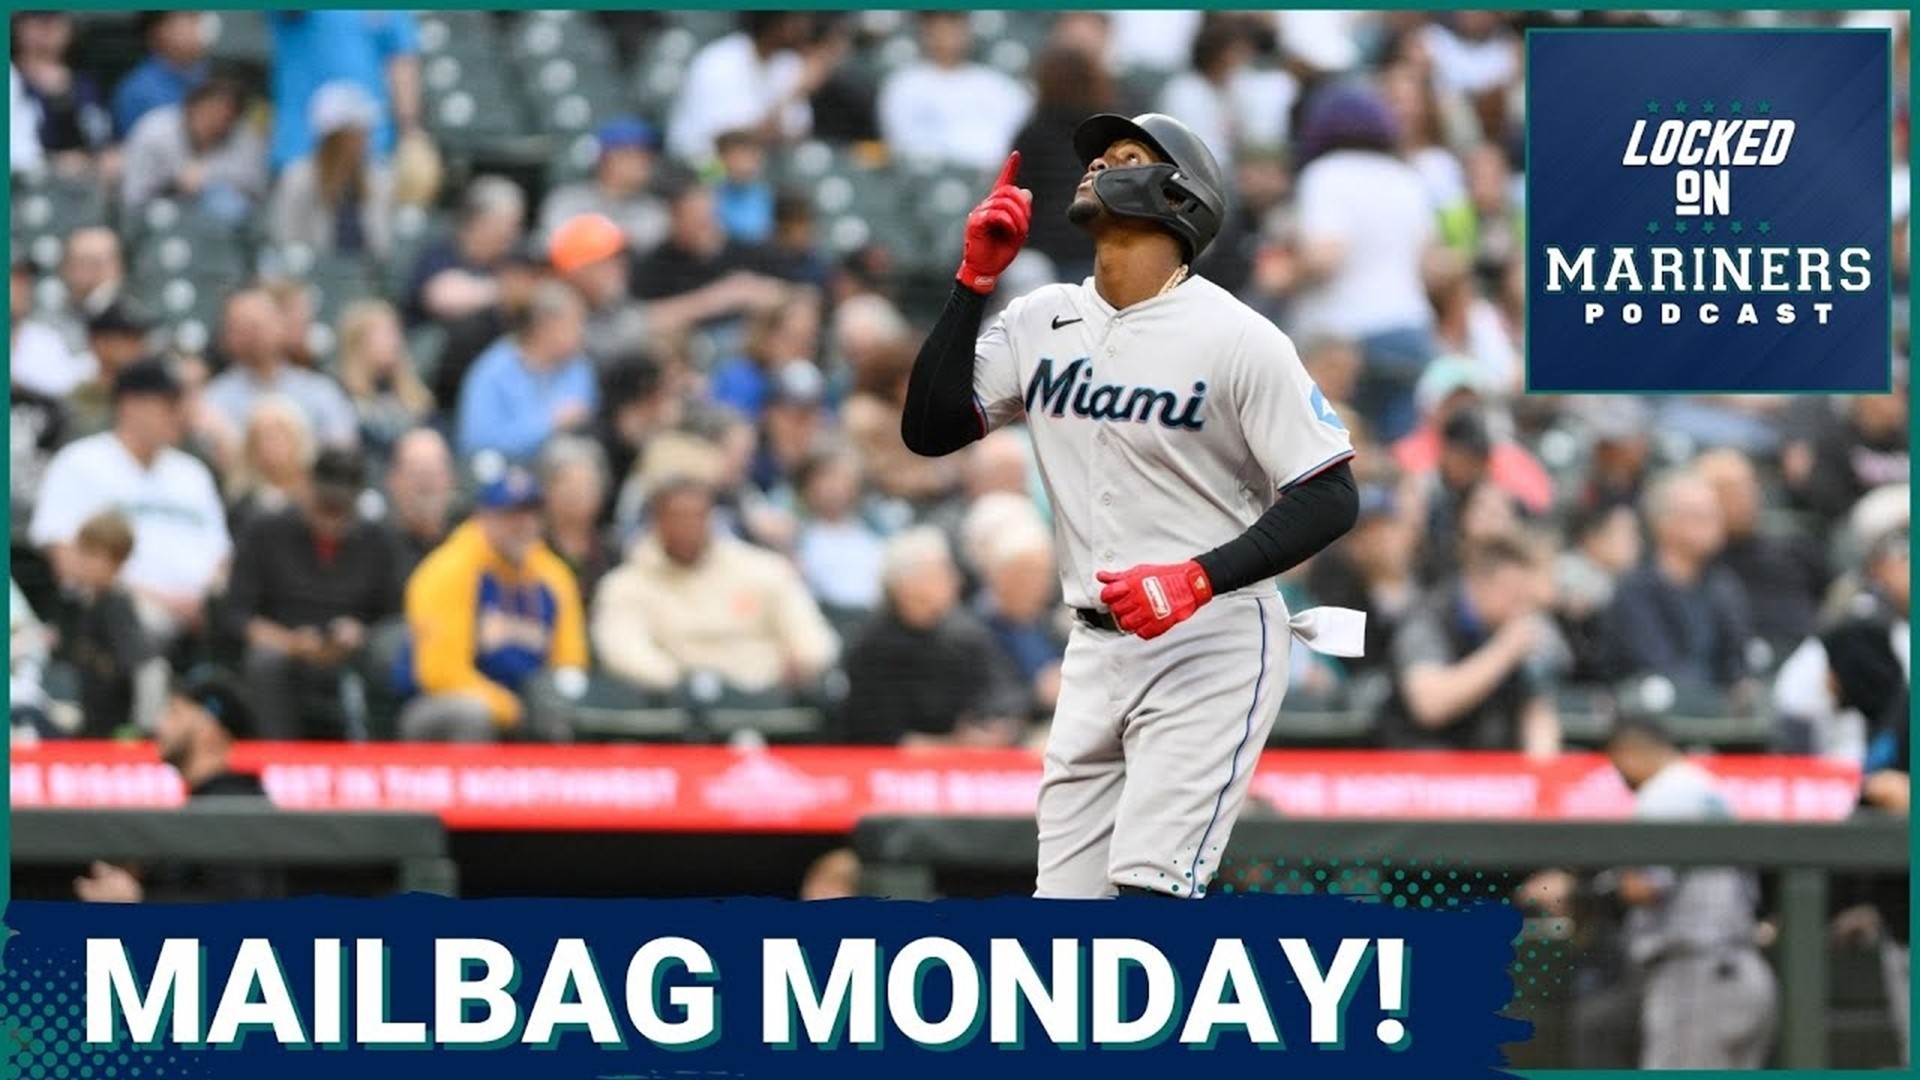 It's Mailbag Monday! Ty and Colby answer your questions, including which position the Mariners should target next.